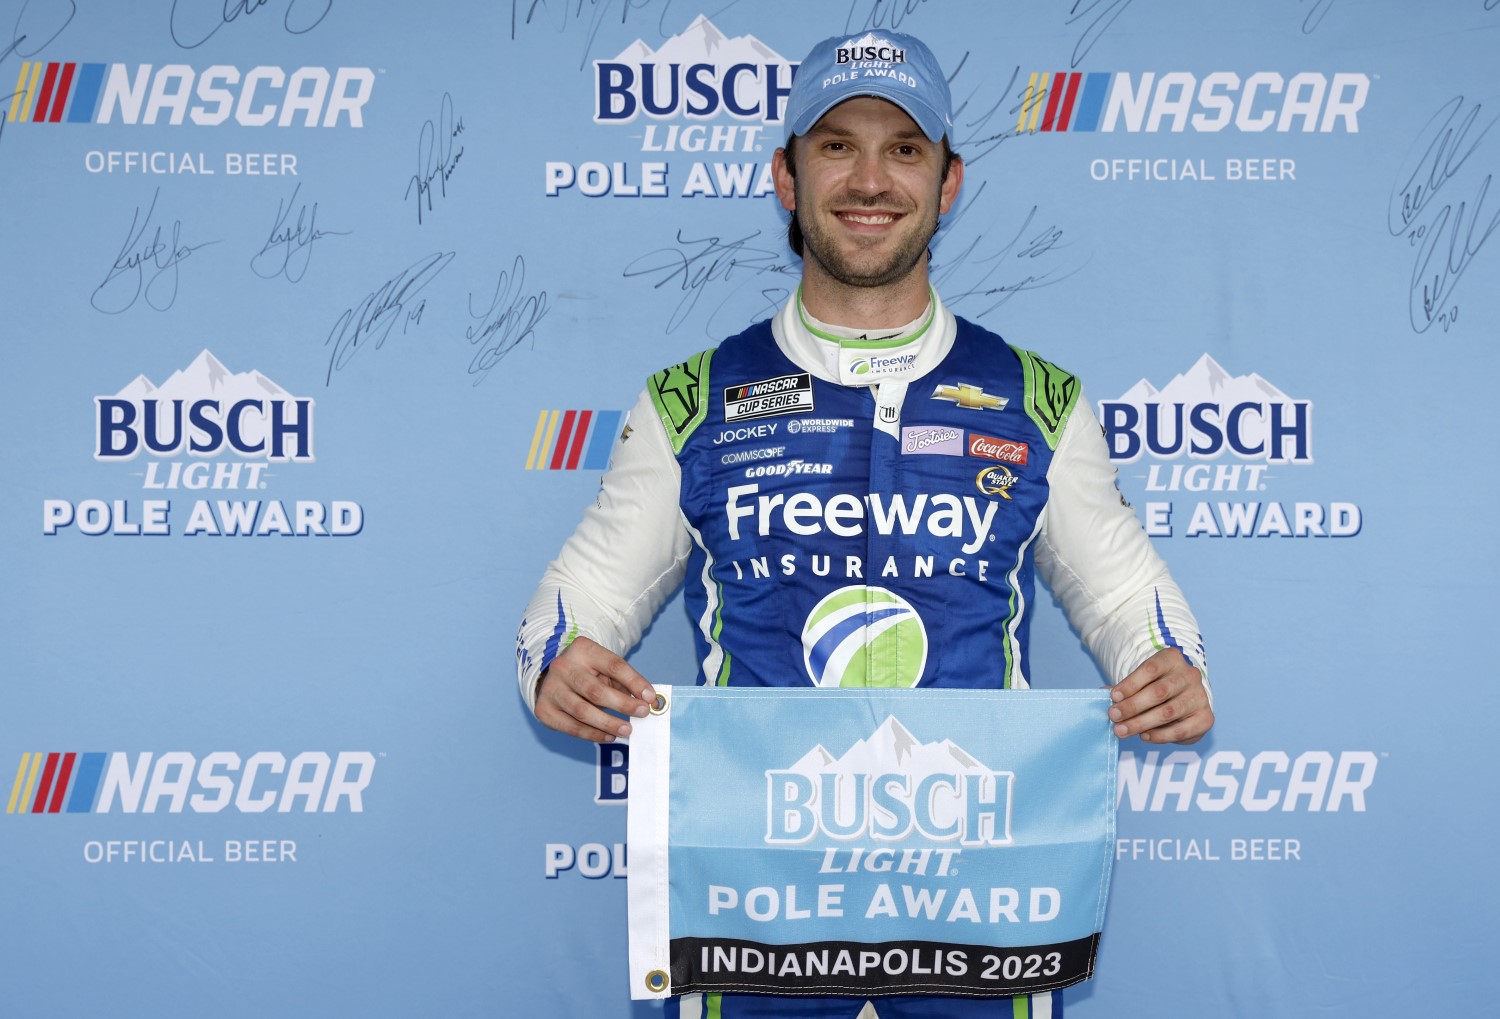 Daniel Suarez, driver of the #99 Freeway.com Chevrolet, poses for photos after winning the pole award during qualifying for the NASCAR Cup Series Verizon 200 at the Brickyard at Indianapolis Motor Speedway on August 12, 2023 in Indianapolis, Indiana. (Photo by Meg Oliphant/Getty Images)